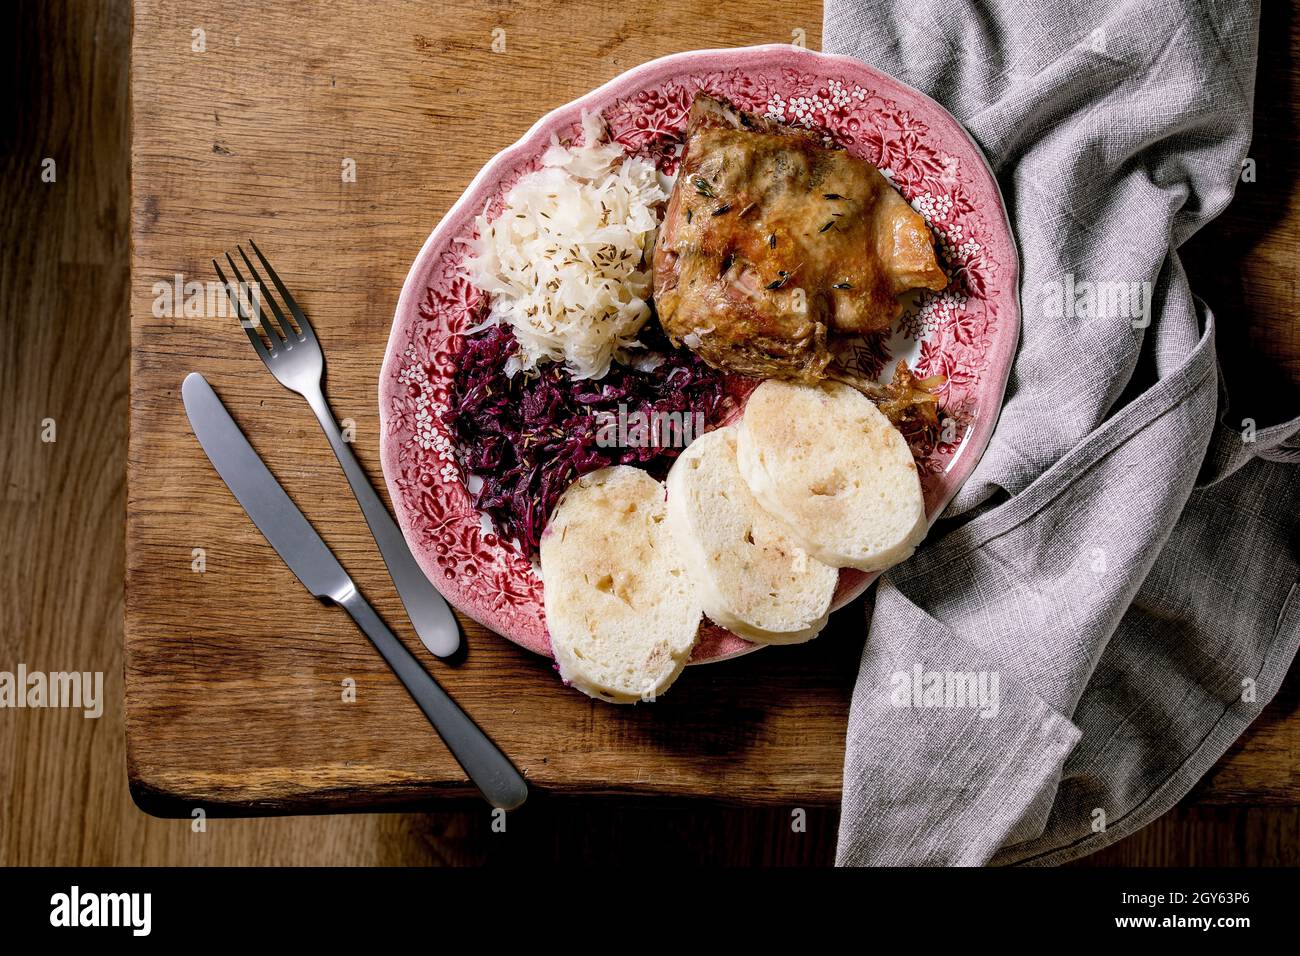 Baked duck legs with sliced boiled bread knedliks and sauerkraut in ceramic plate, decorated with napkin over brown wooden table. Traditional Czech, G Stock Photo